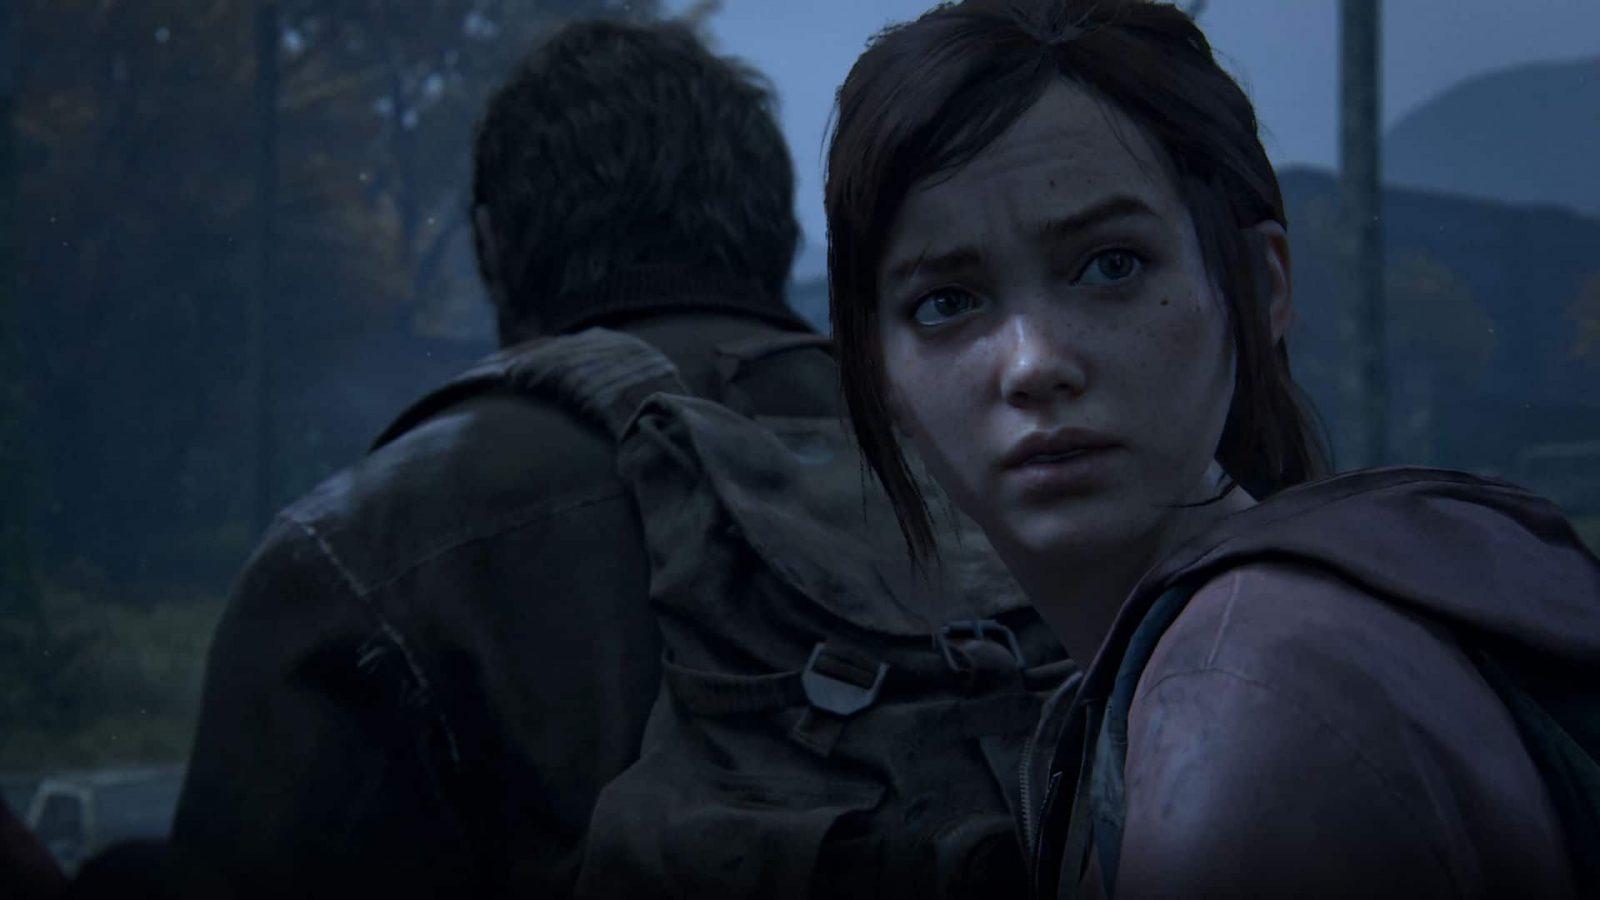 HBO's The Last of Us Reveals Joel & Ellie in a Critical Game Location